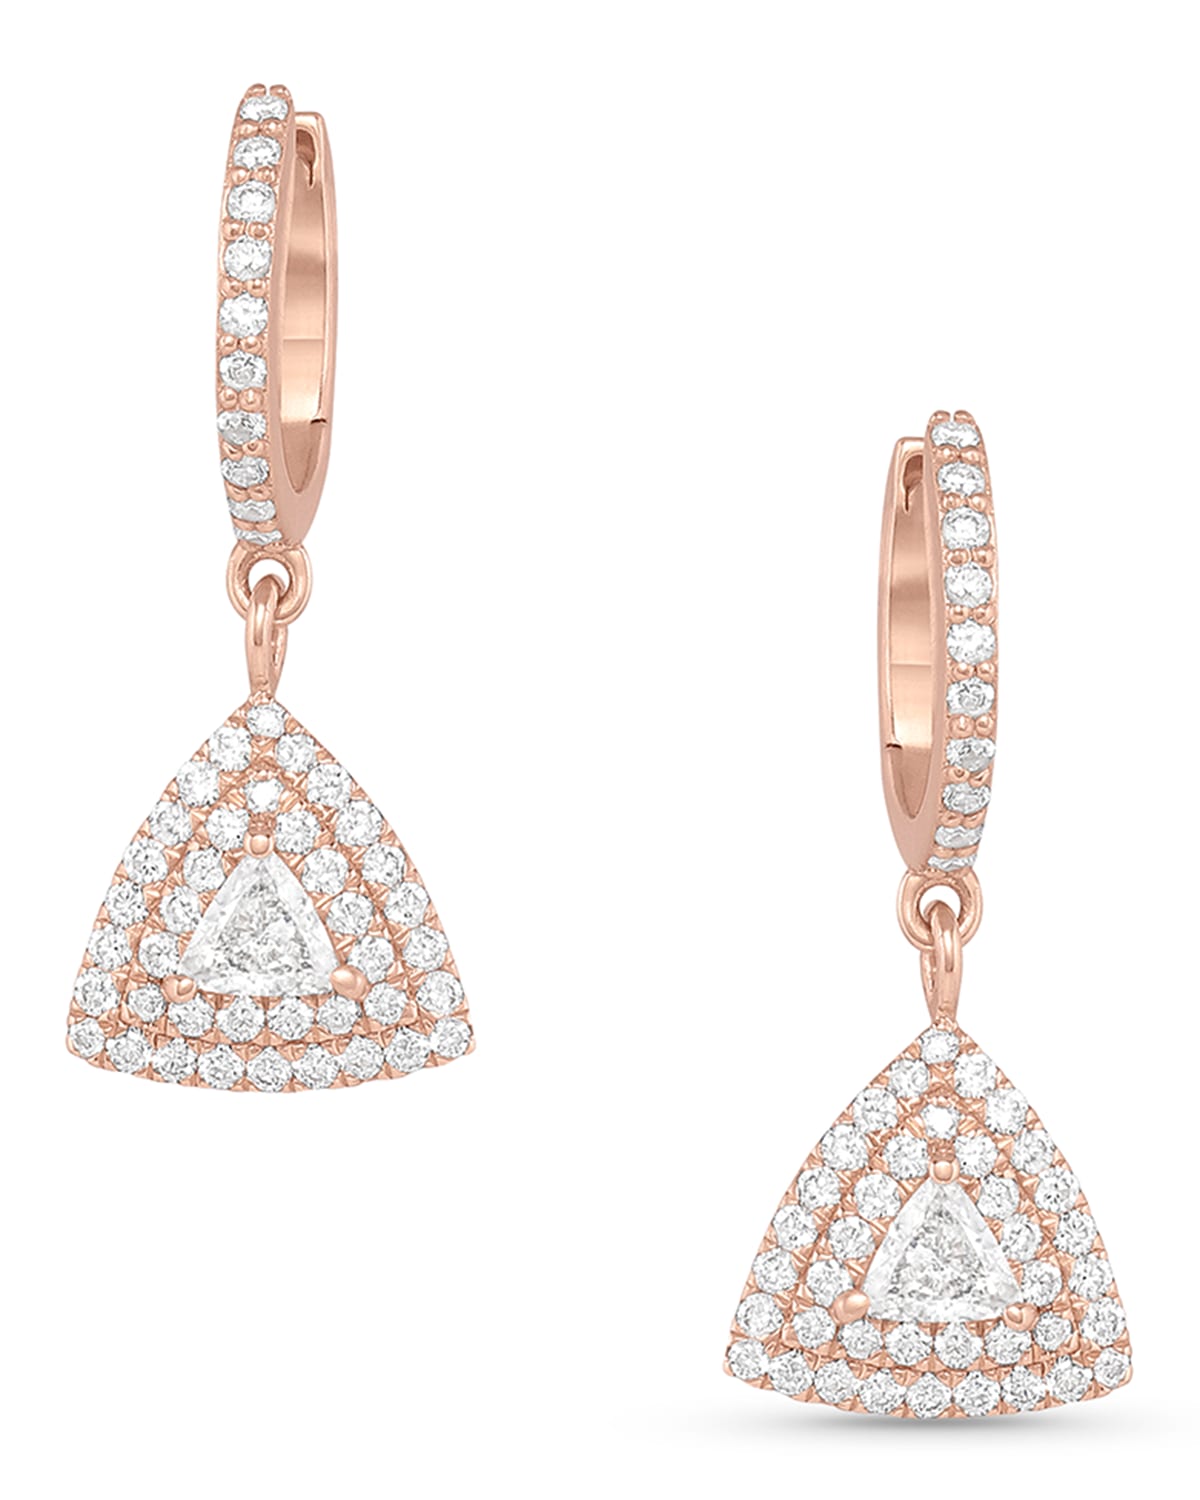 Dominique Cohen 18k Rose Gold Diamond Hoop and Drop Earrings